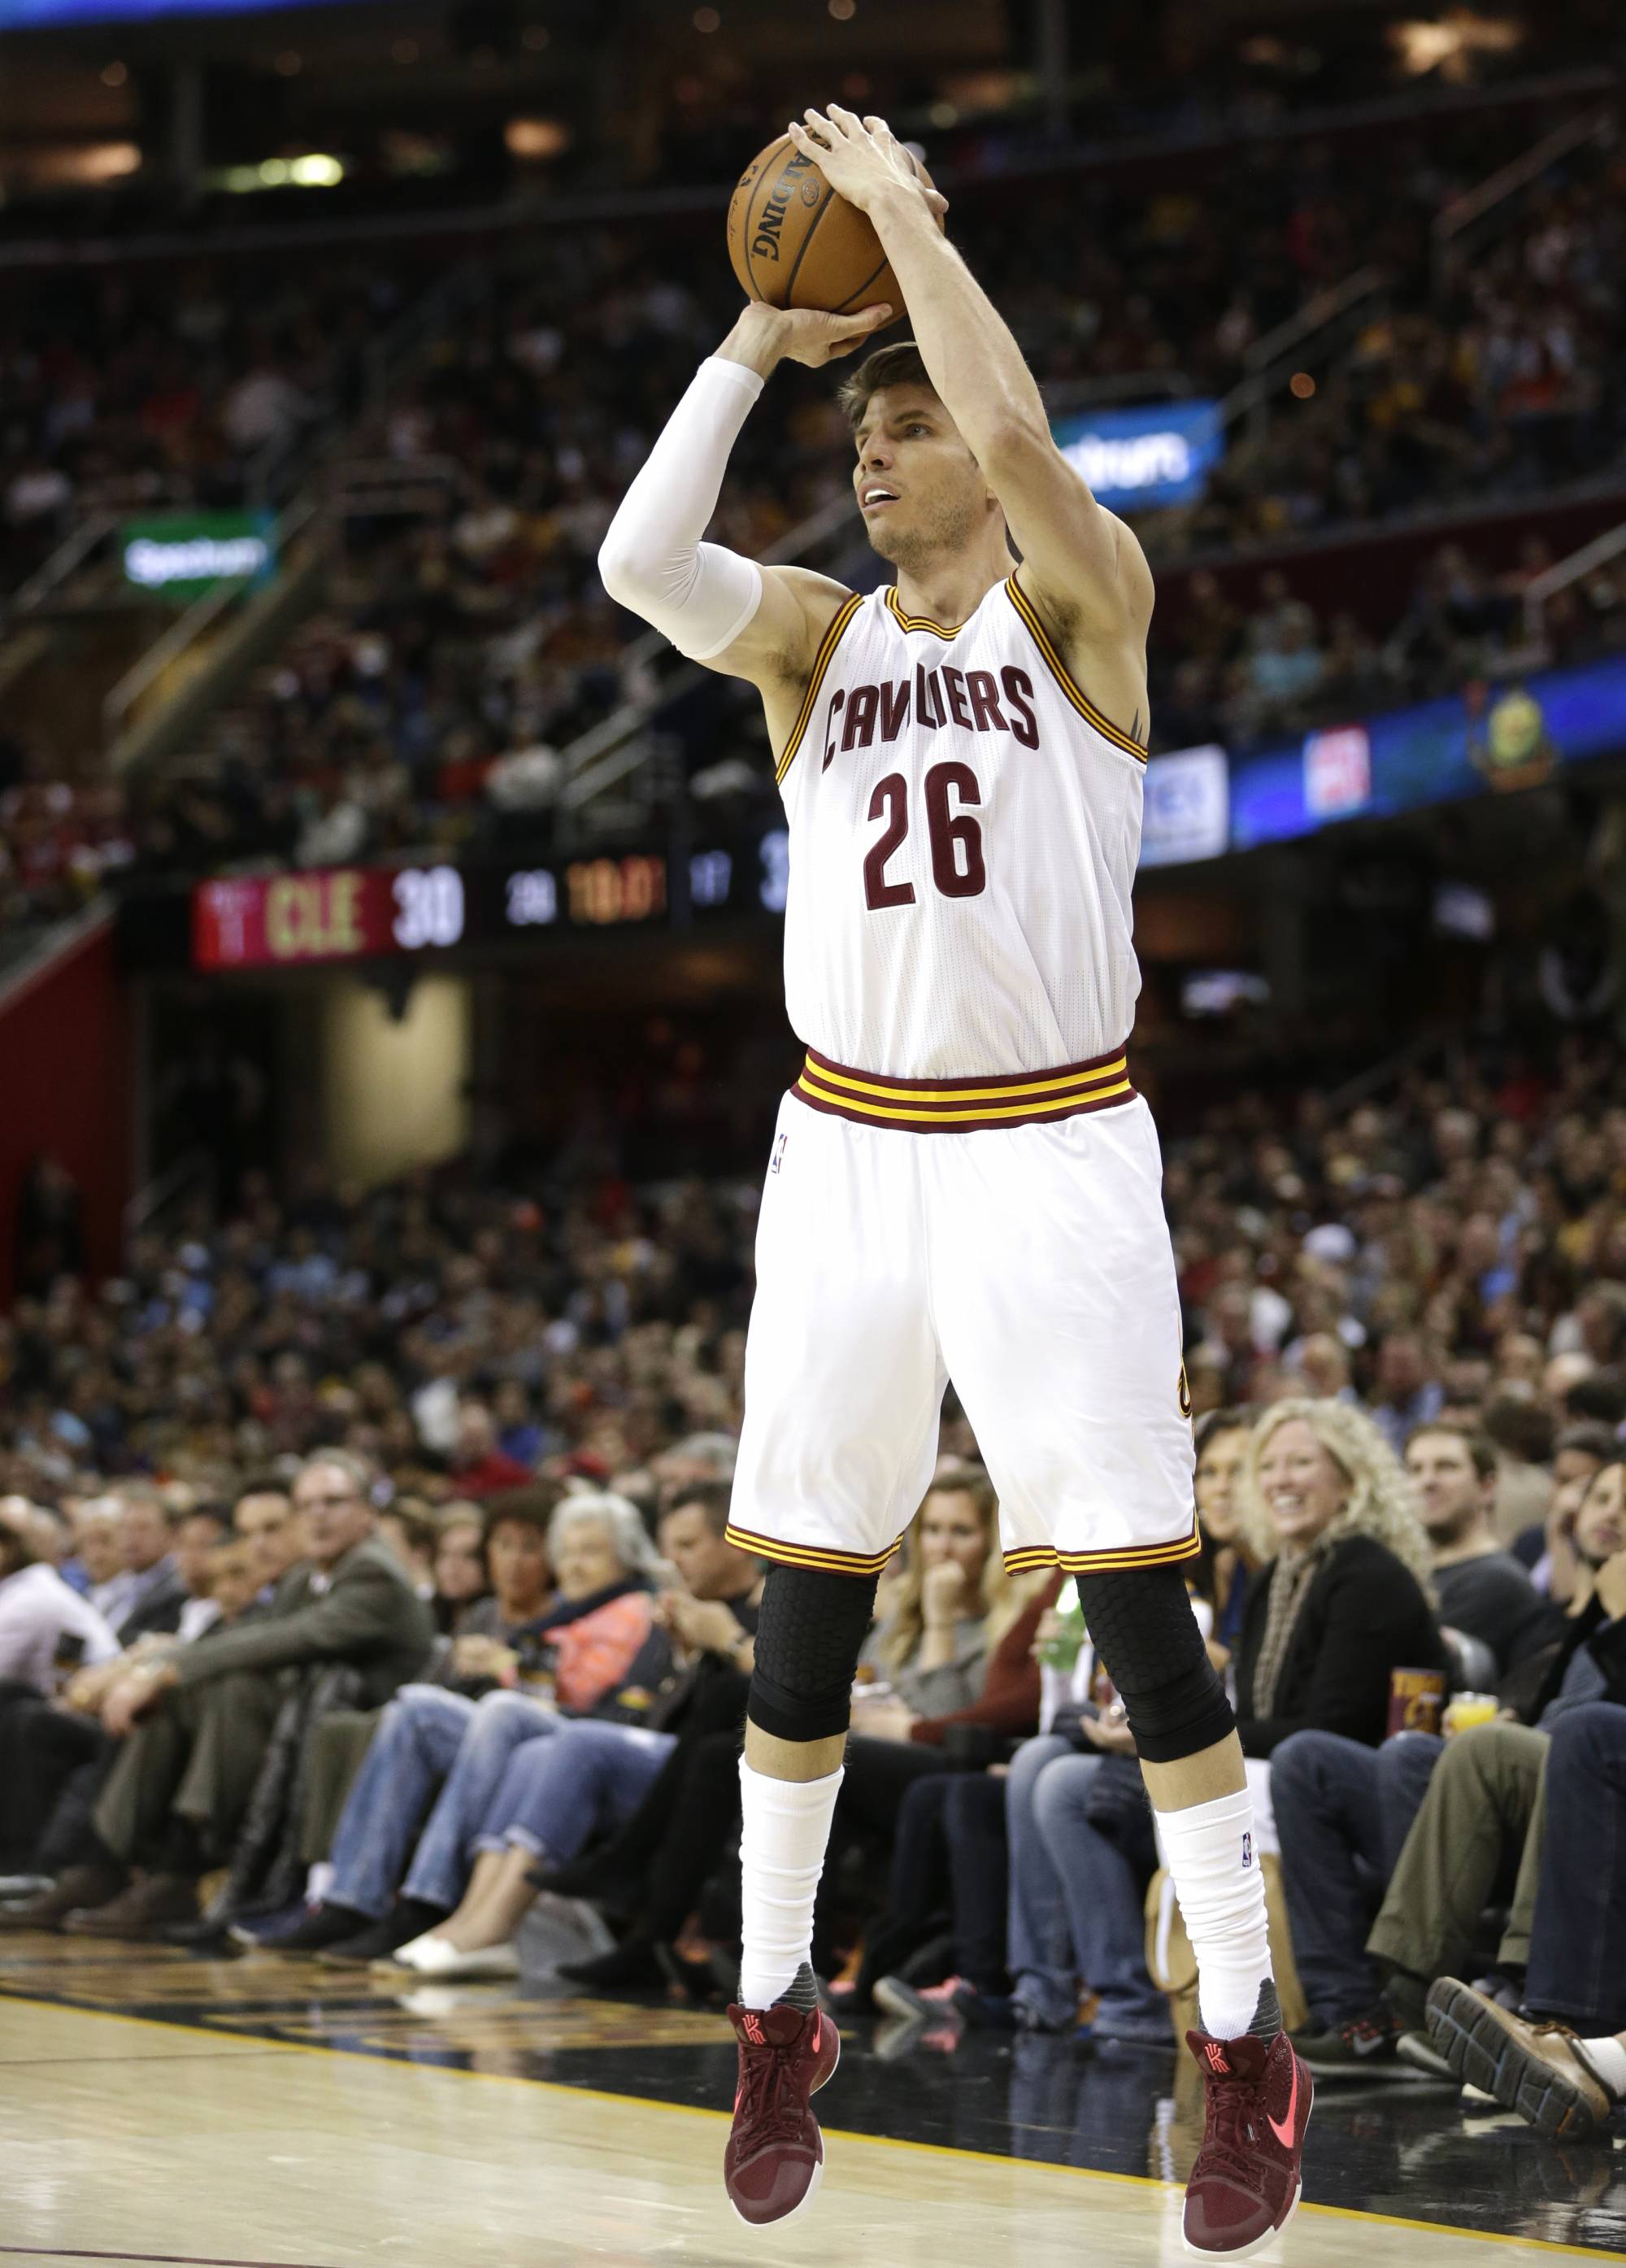 On target: Korver has the perfect shot as Cavs aim for title